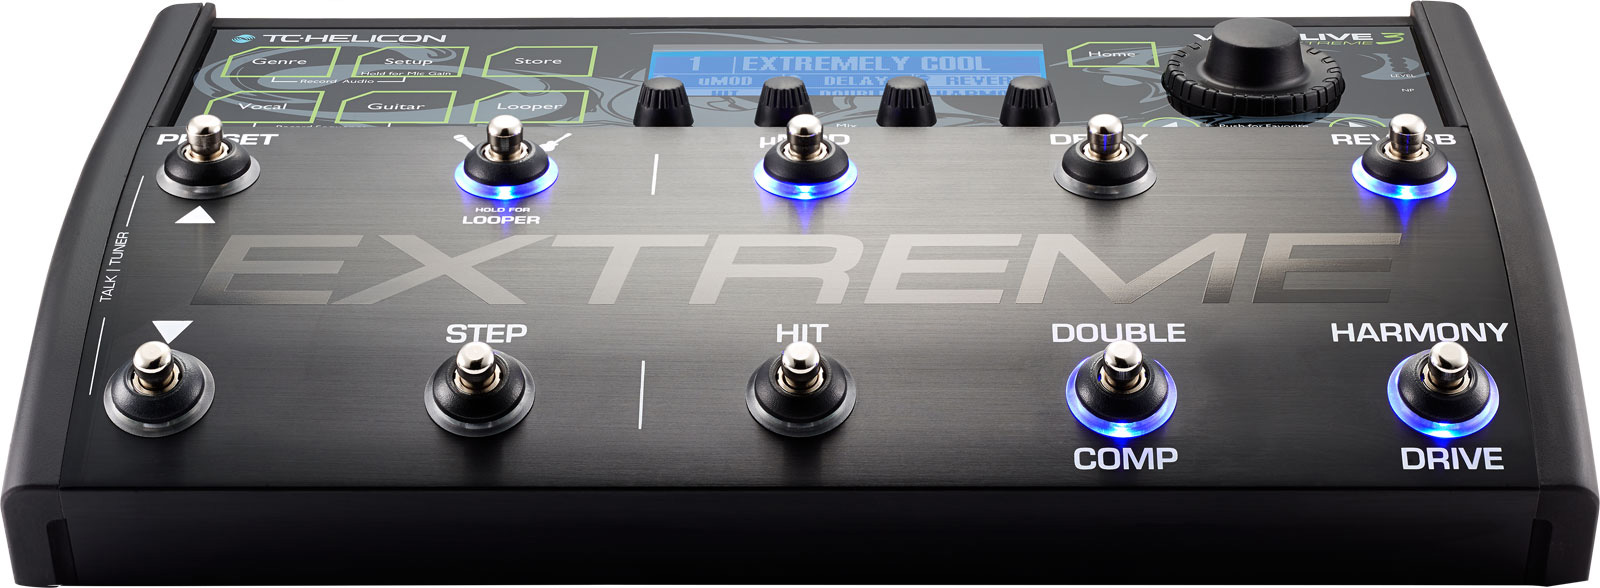 Tc-helicon Voicelive 3 Extreme - Effects processor - Variation 1